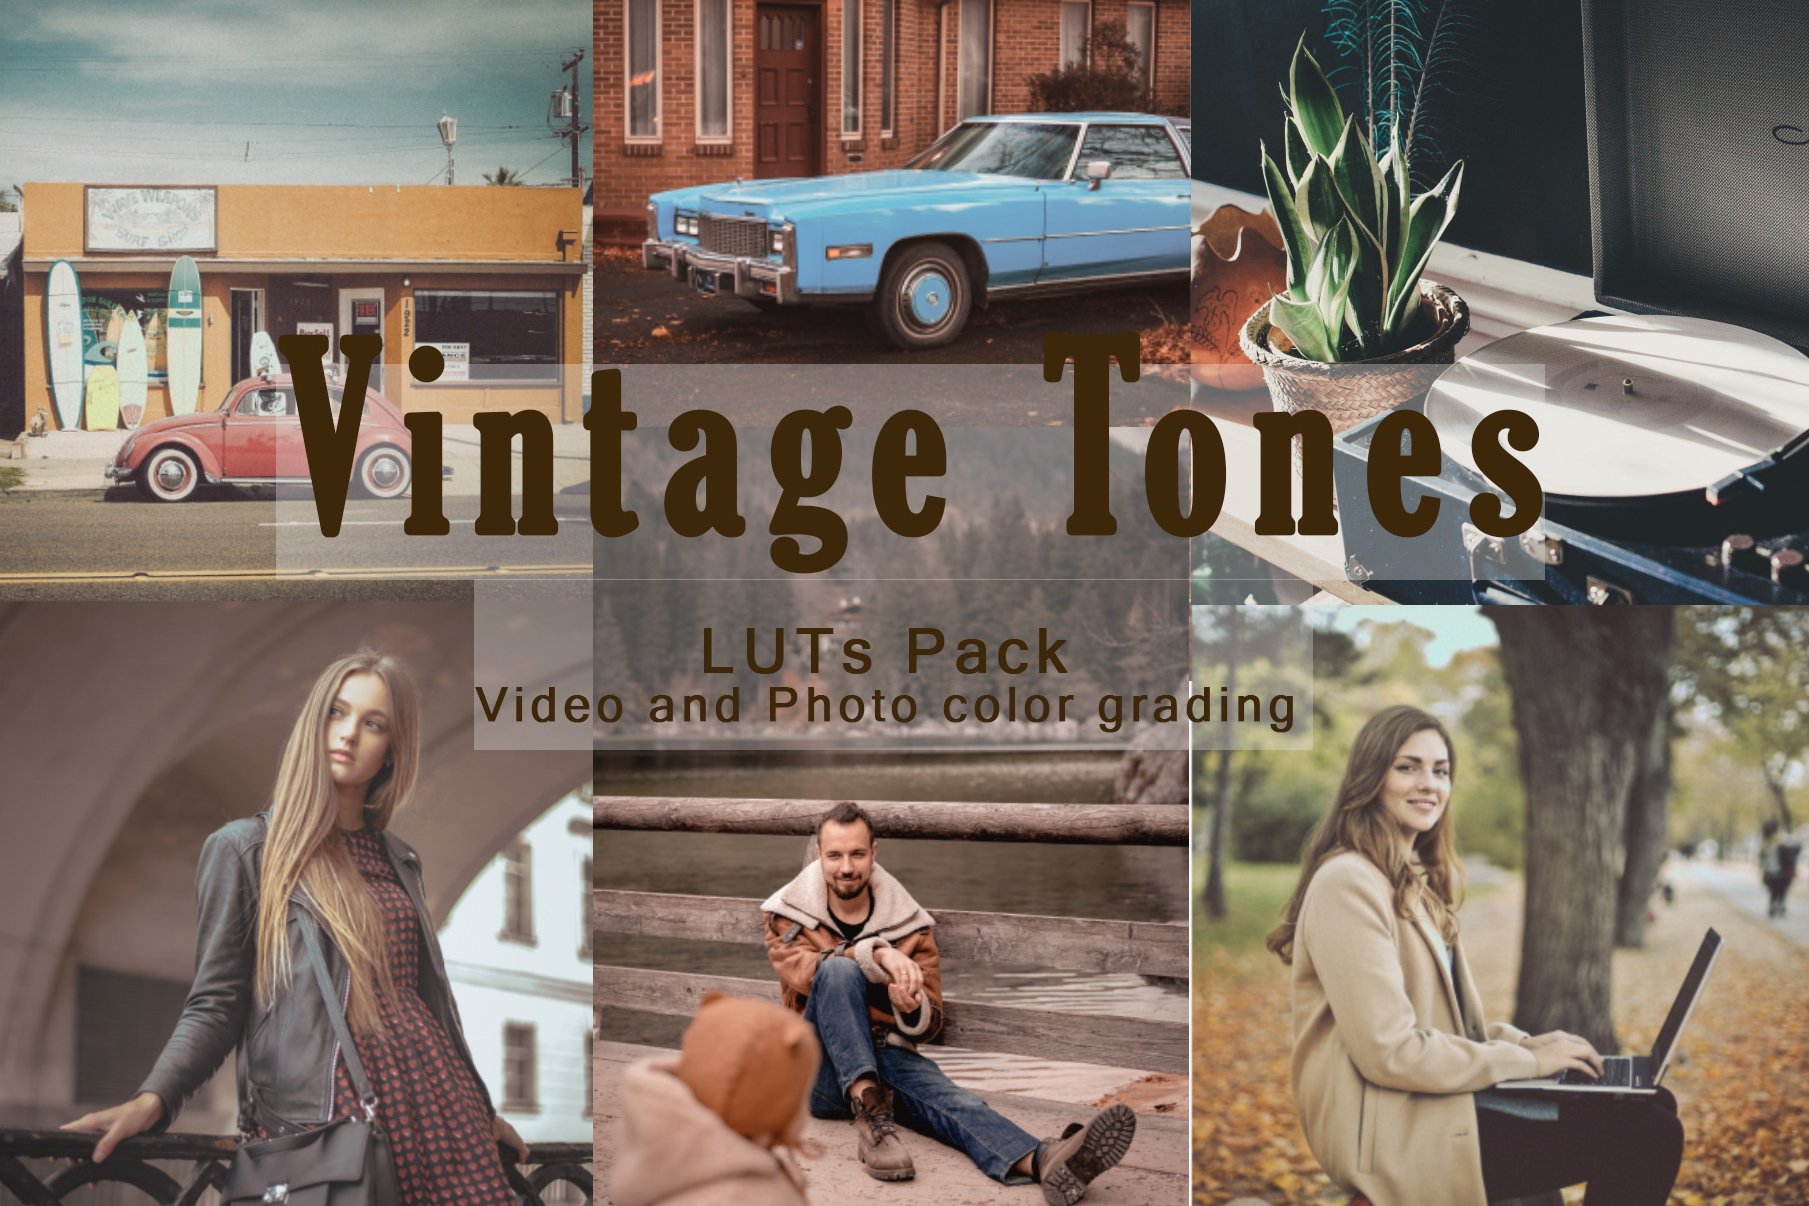 Vintage Tones -  LUTs Packcover image.